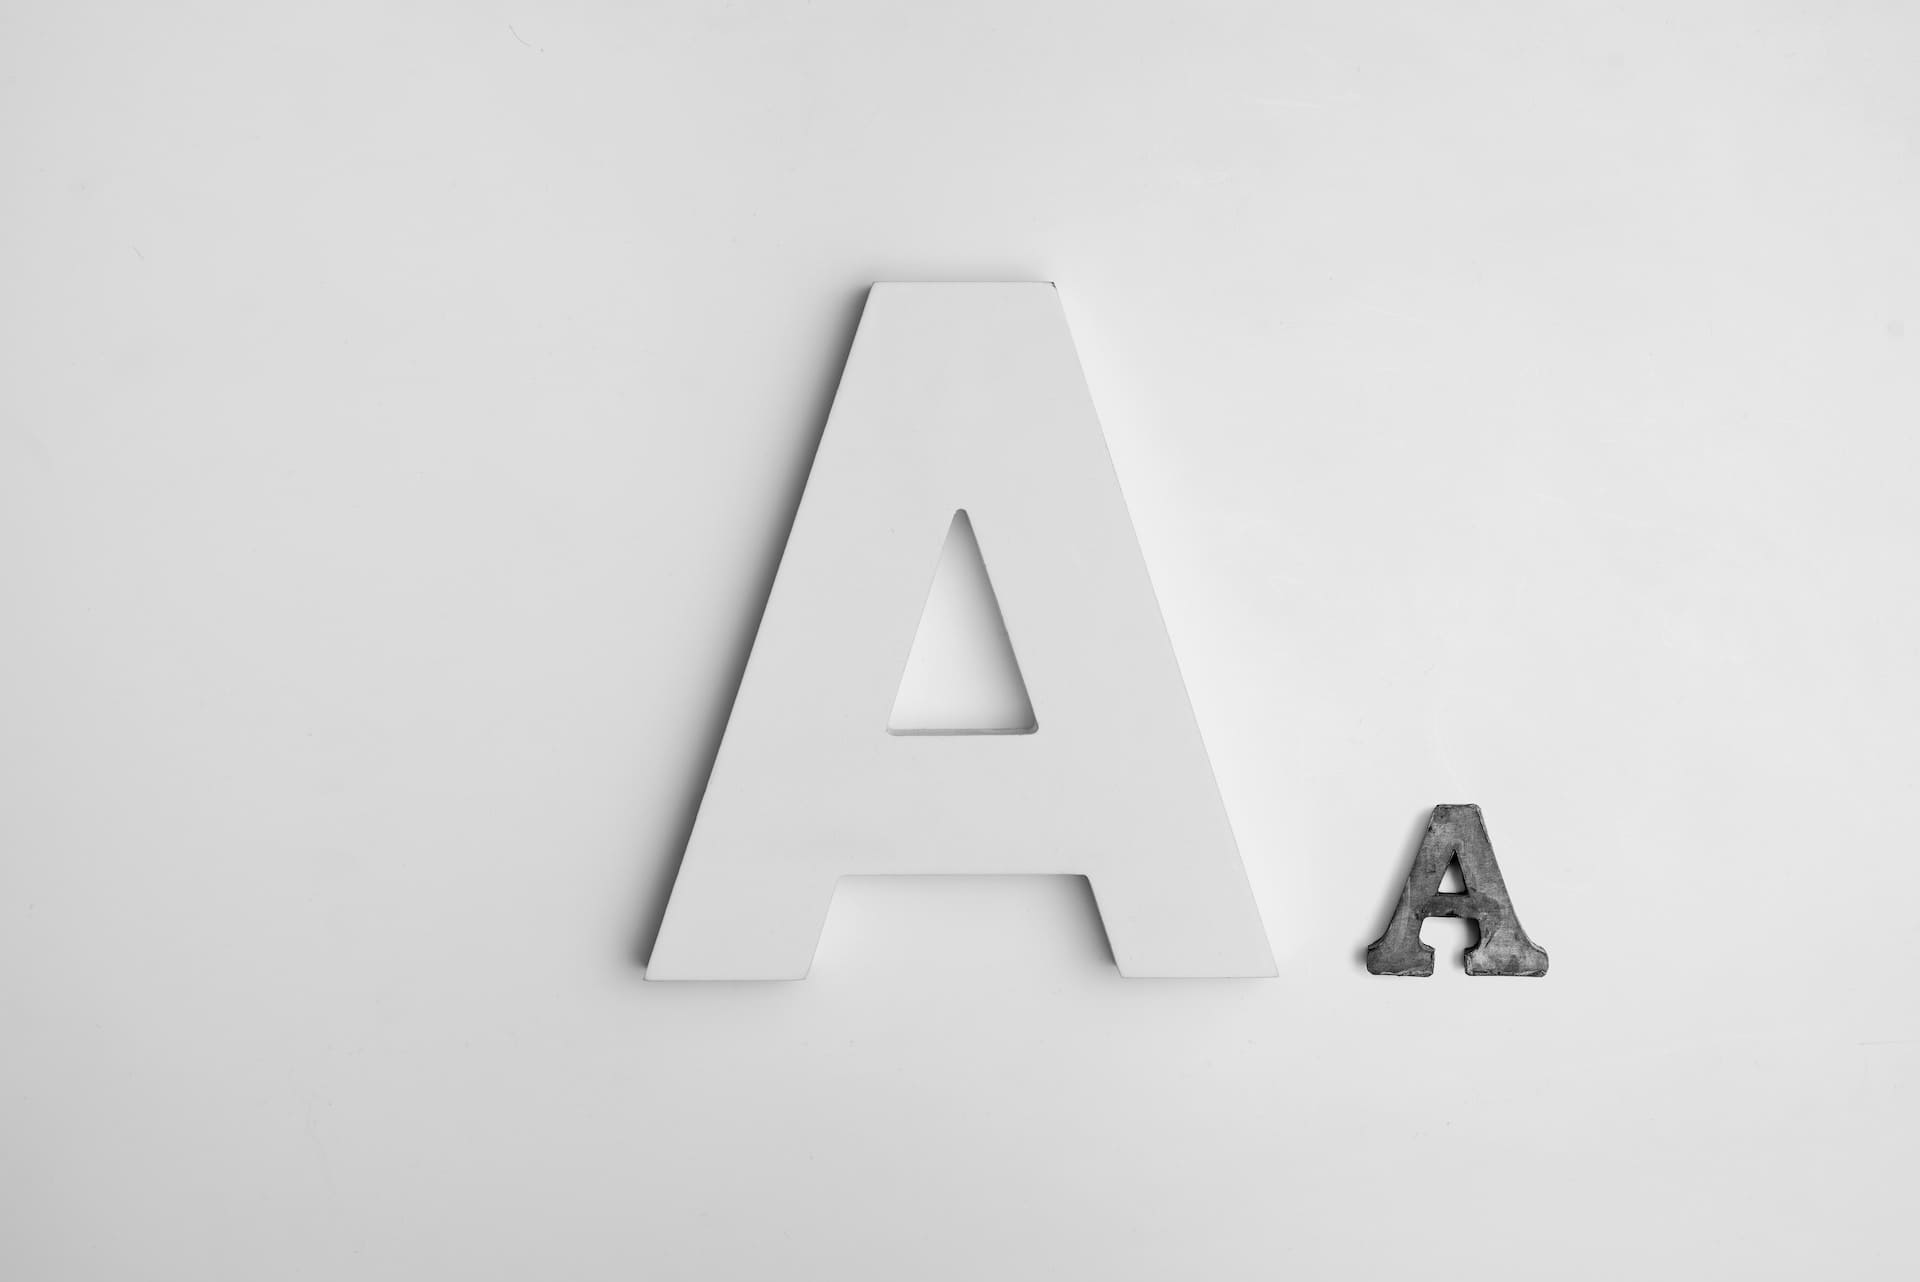 Two different sizes of letter A - the one in the center is Off-White in colour and about 5 times bigger than the A on its right in grey colour..